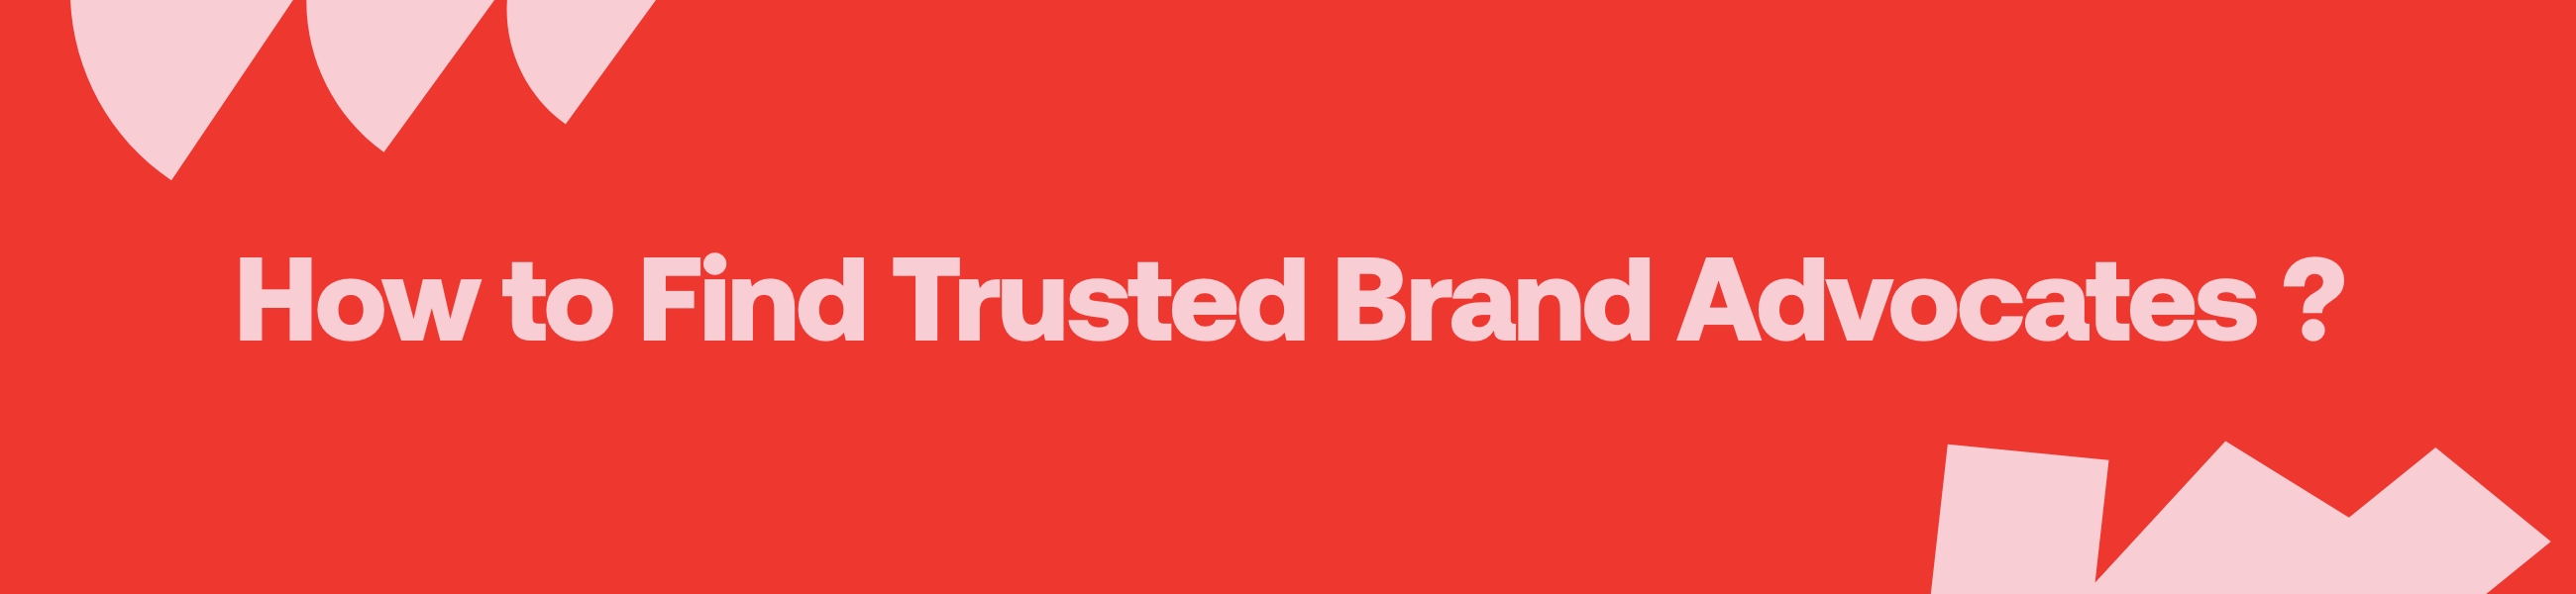 Find-Trusted-Brand-Advocates